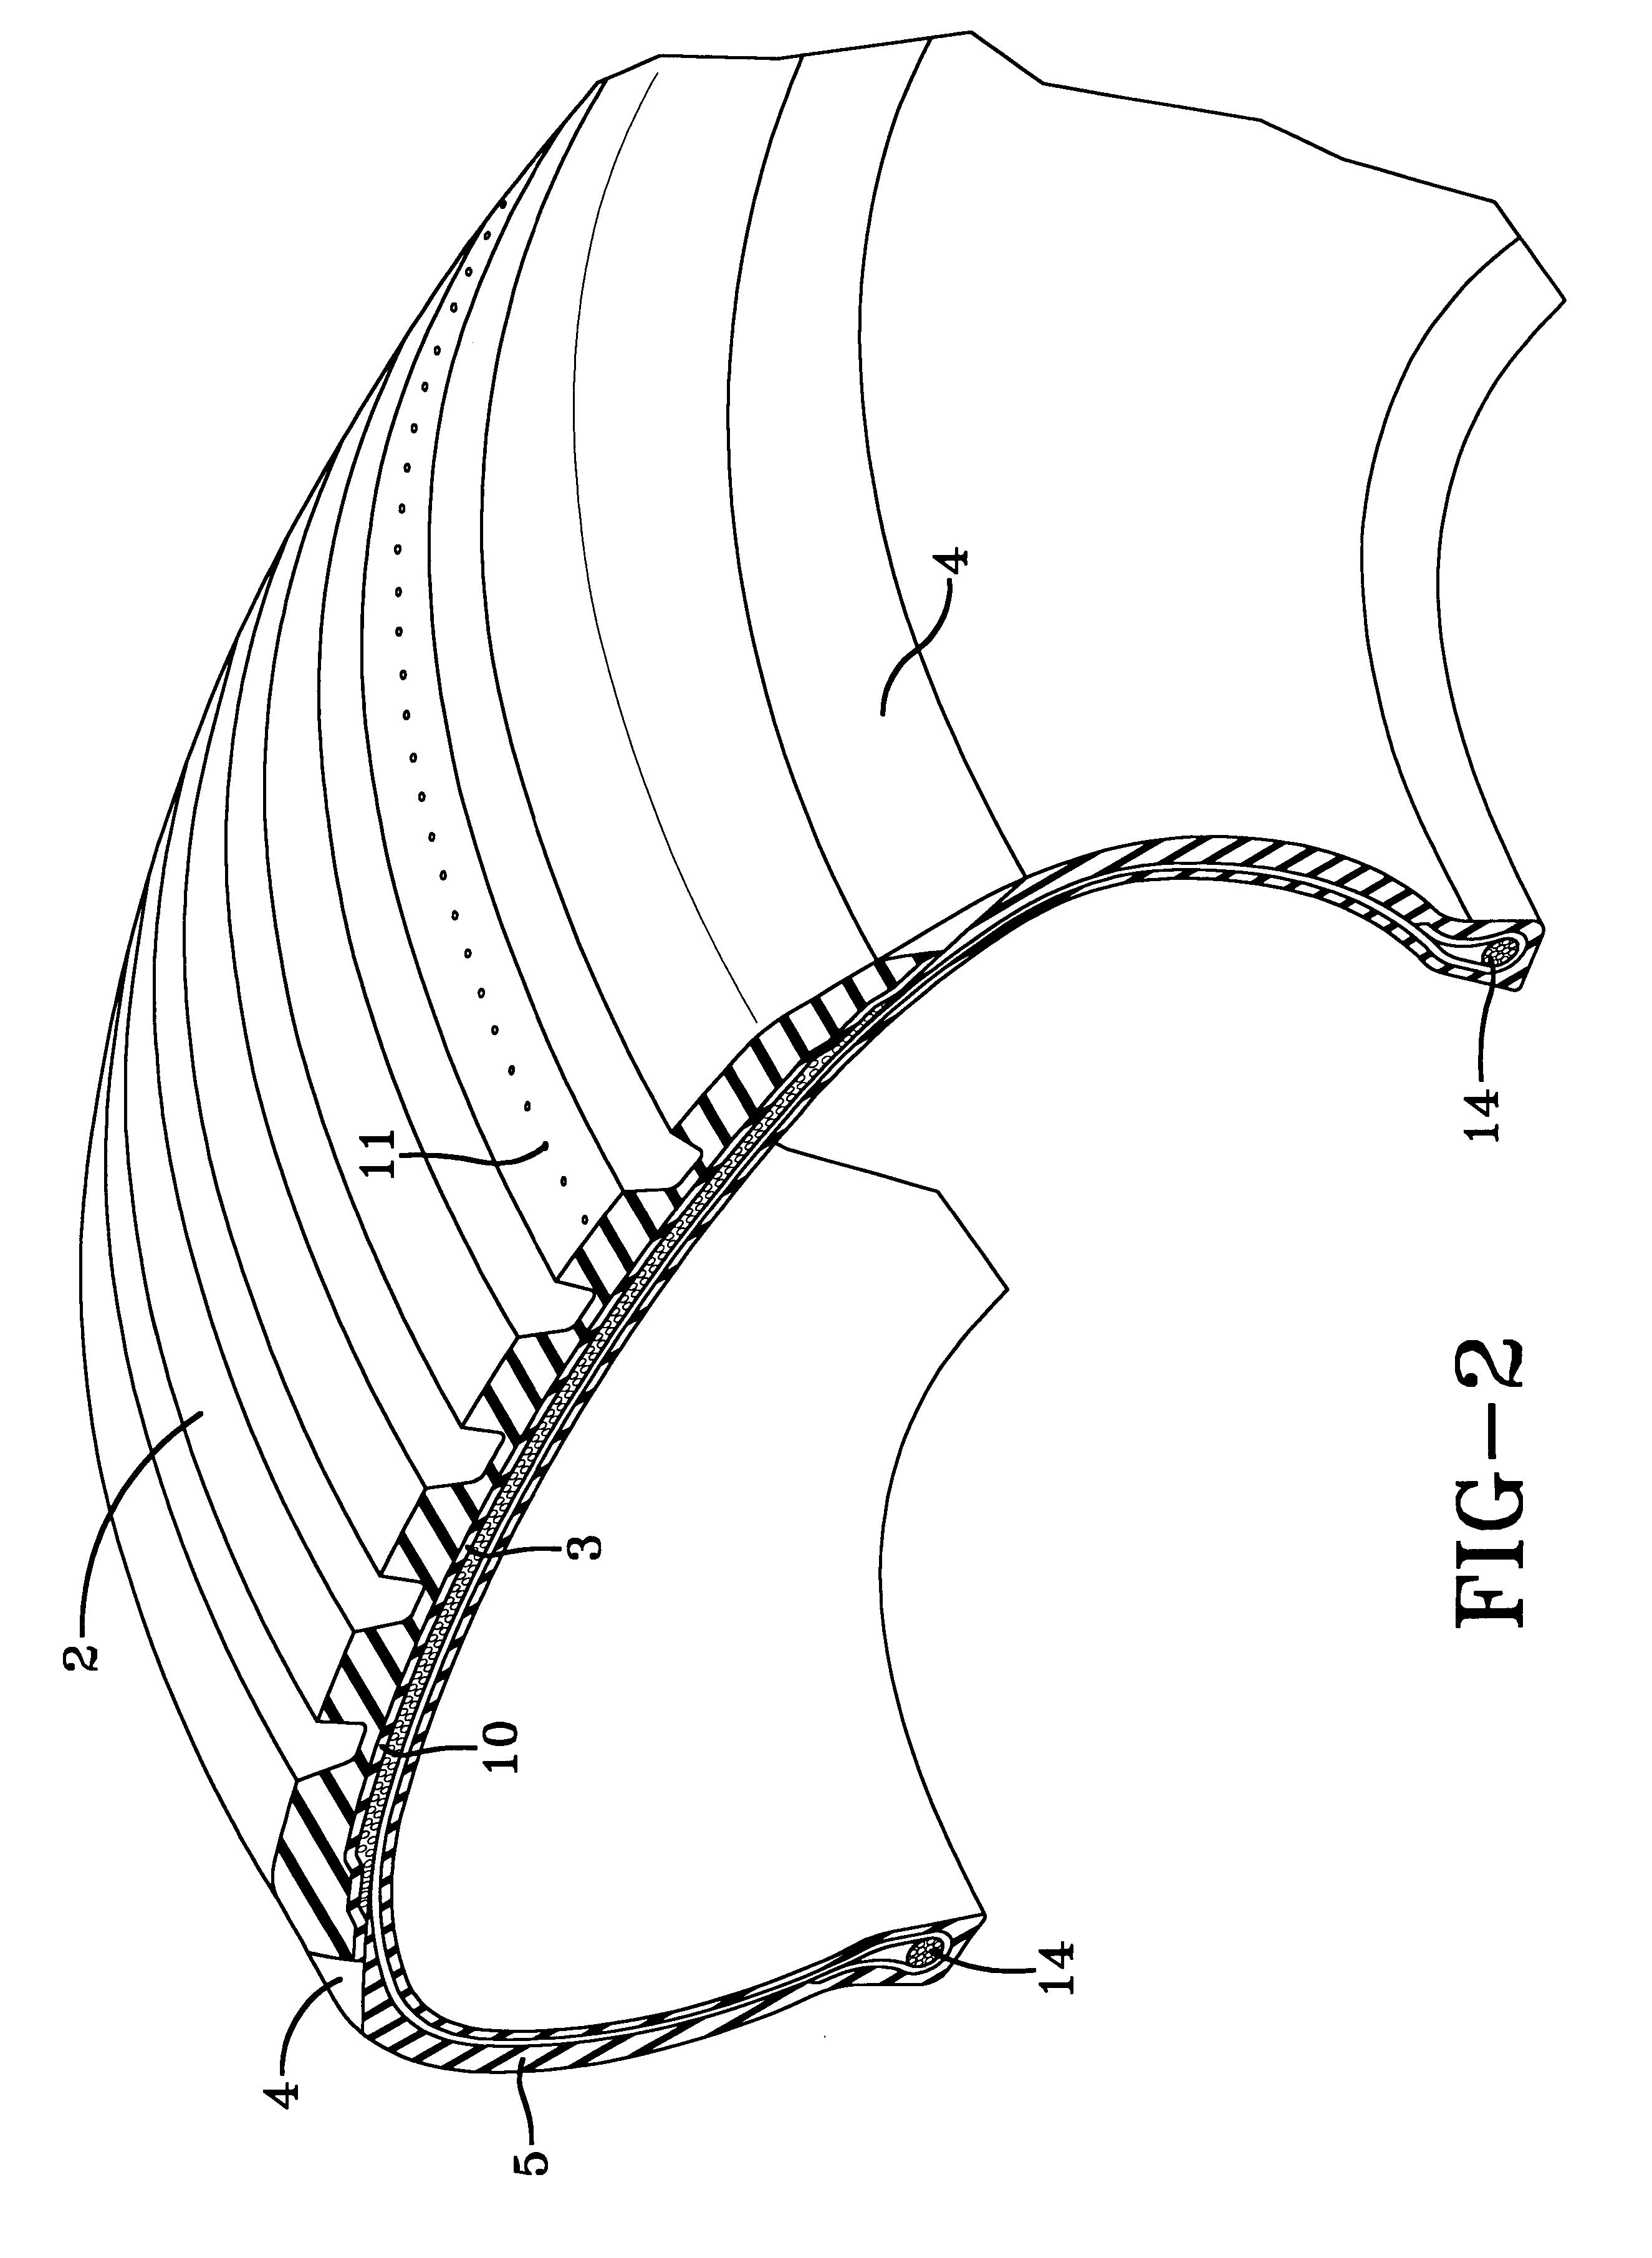 Tire with tread containing electrically conductive staples